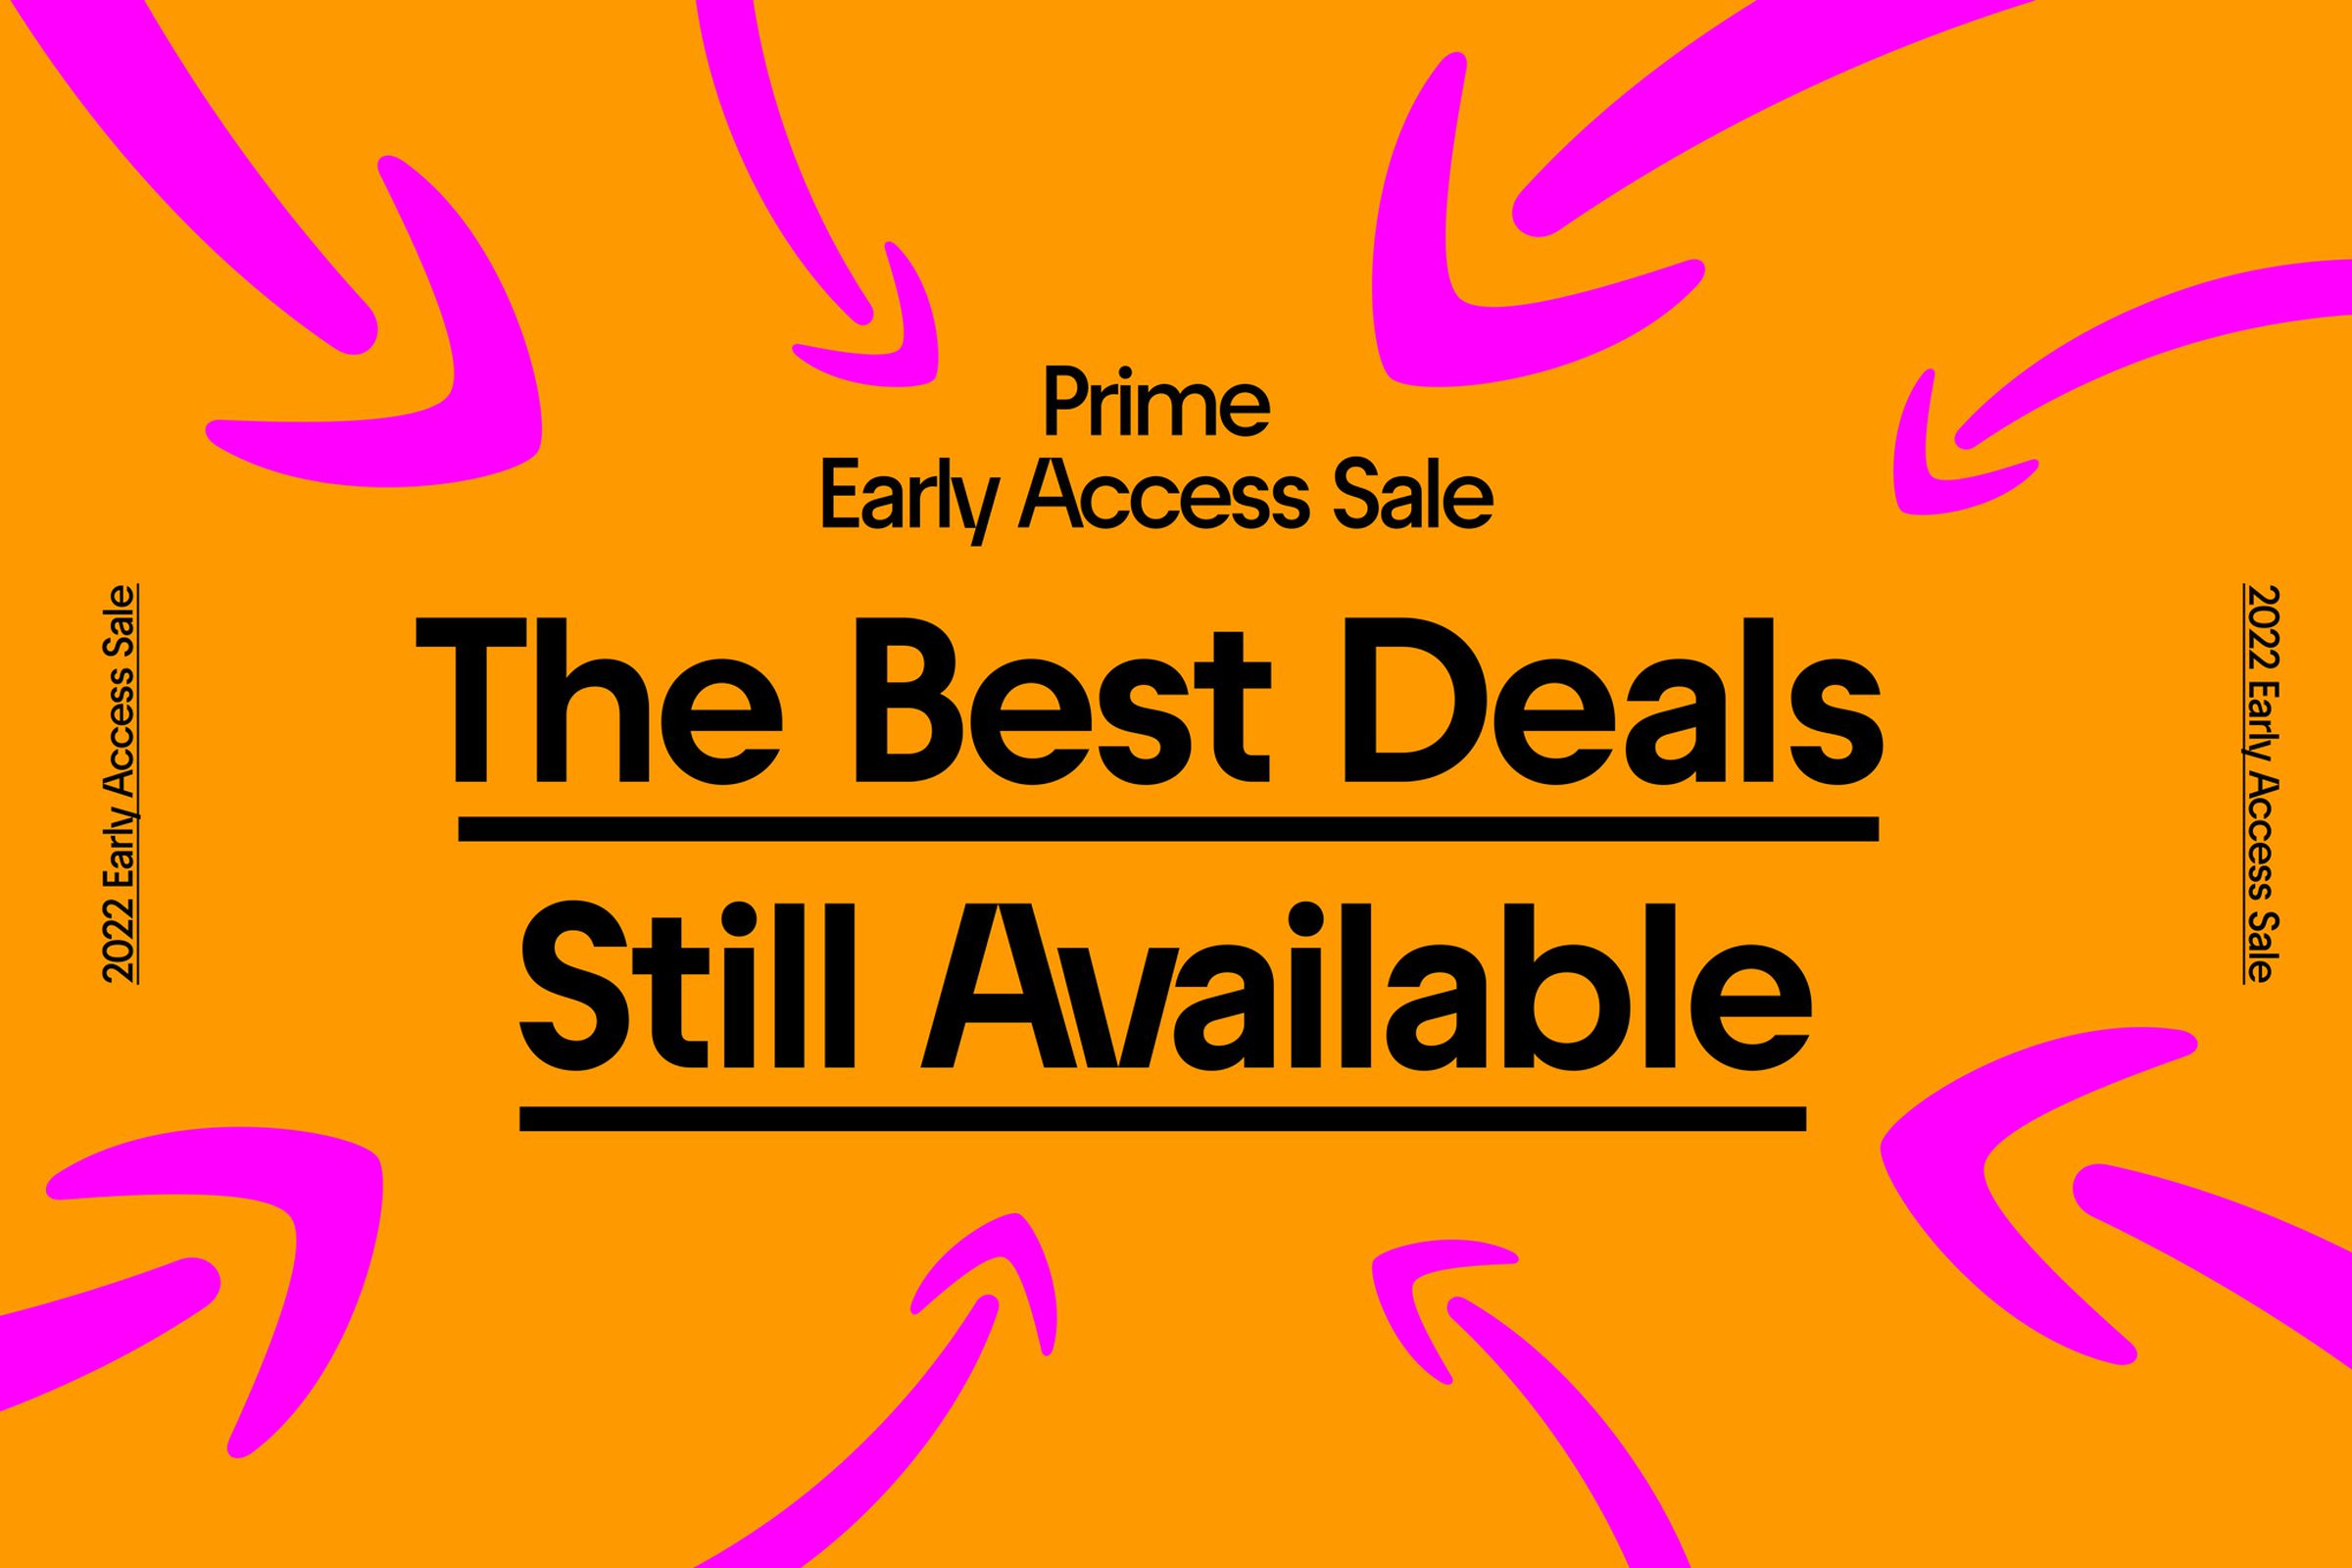 Amazon’s Prime Day Early Access Sale is over, but there are still plenty of great deals to check out.